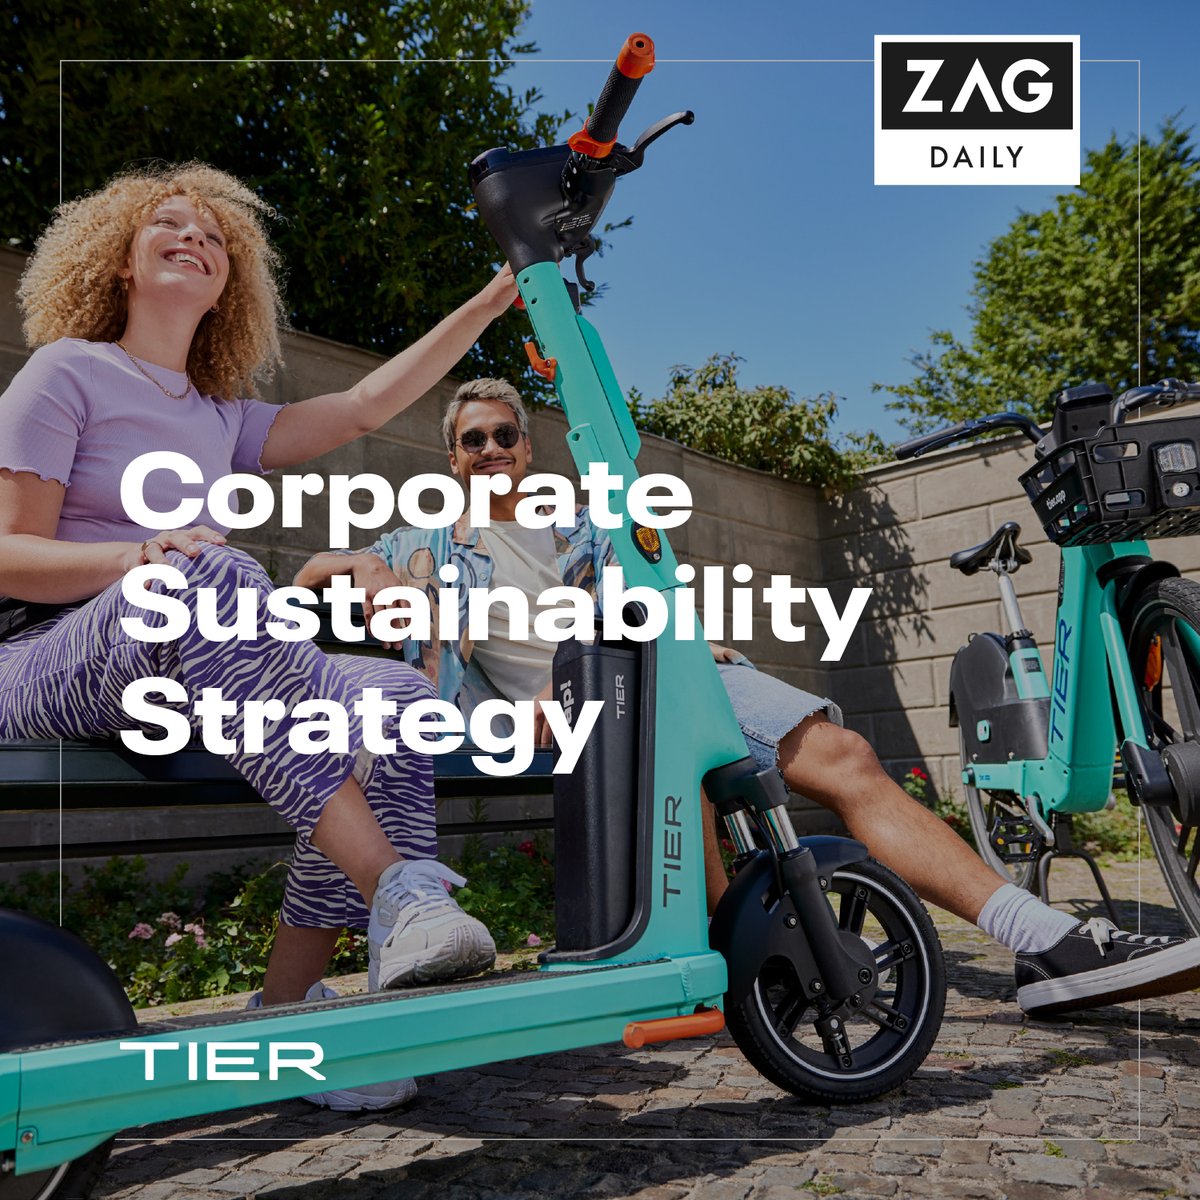 .@tier_mobility details cuts of 48 million km car trips in new Corporate Sustainability Strategy strategy. Read more: bit.ly/3scmyRG